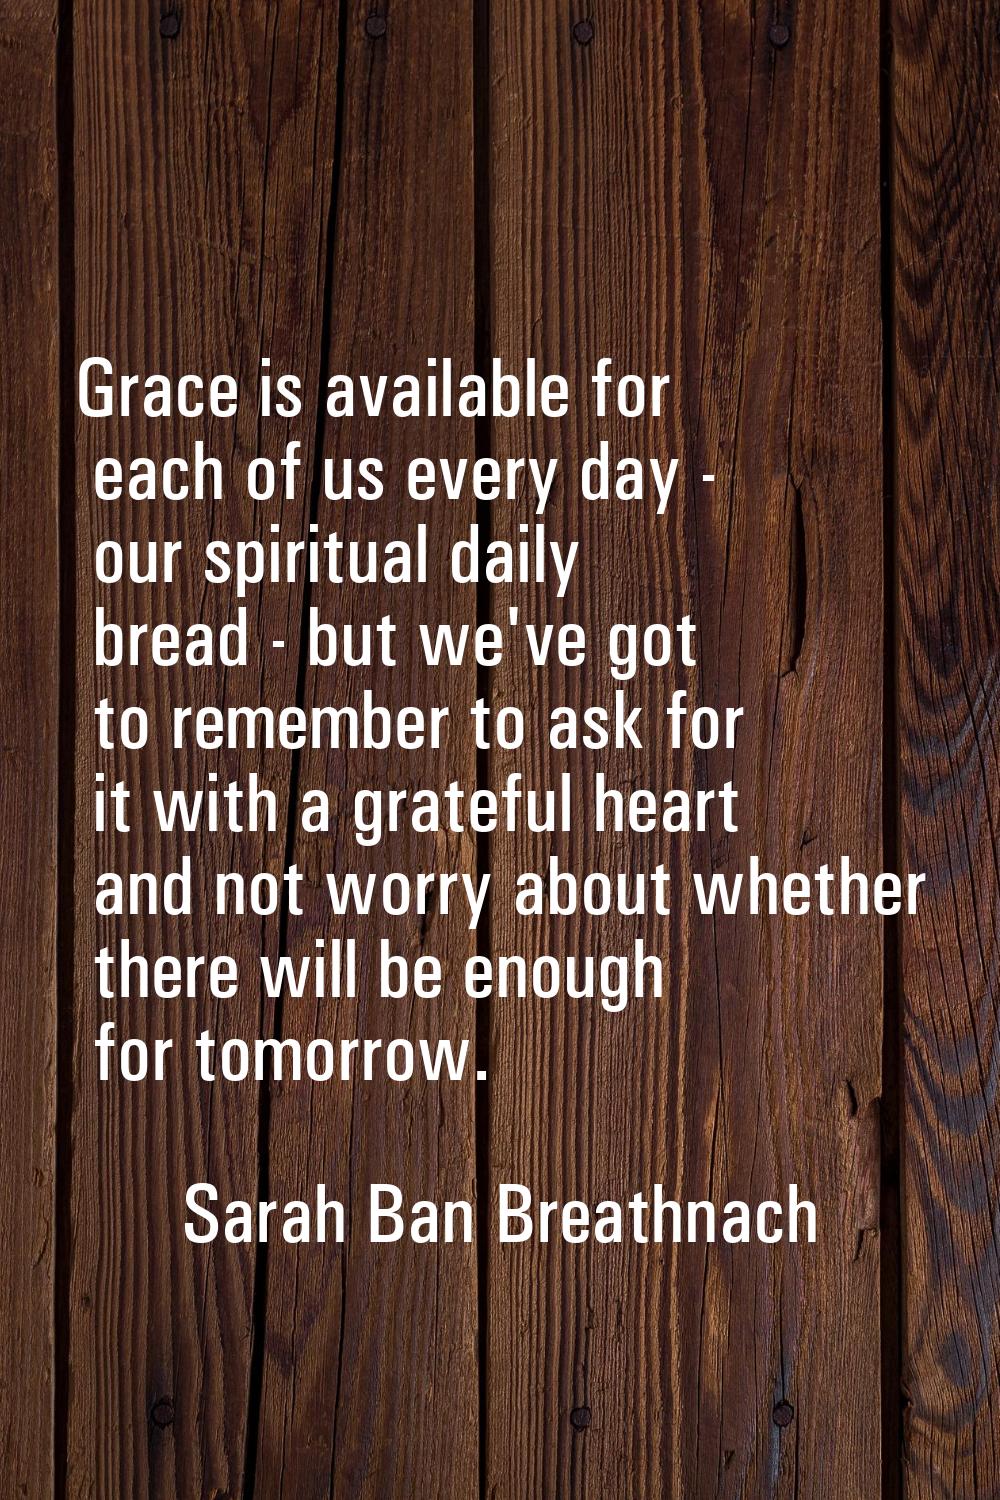 Grace is available for each of us every day - our spiritual daily bread - but we've got to remember